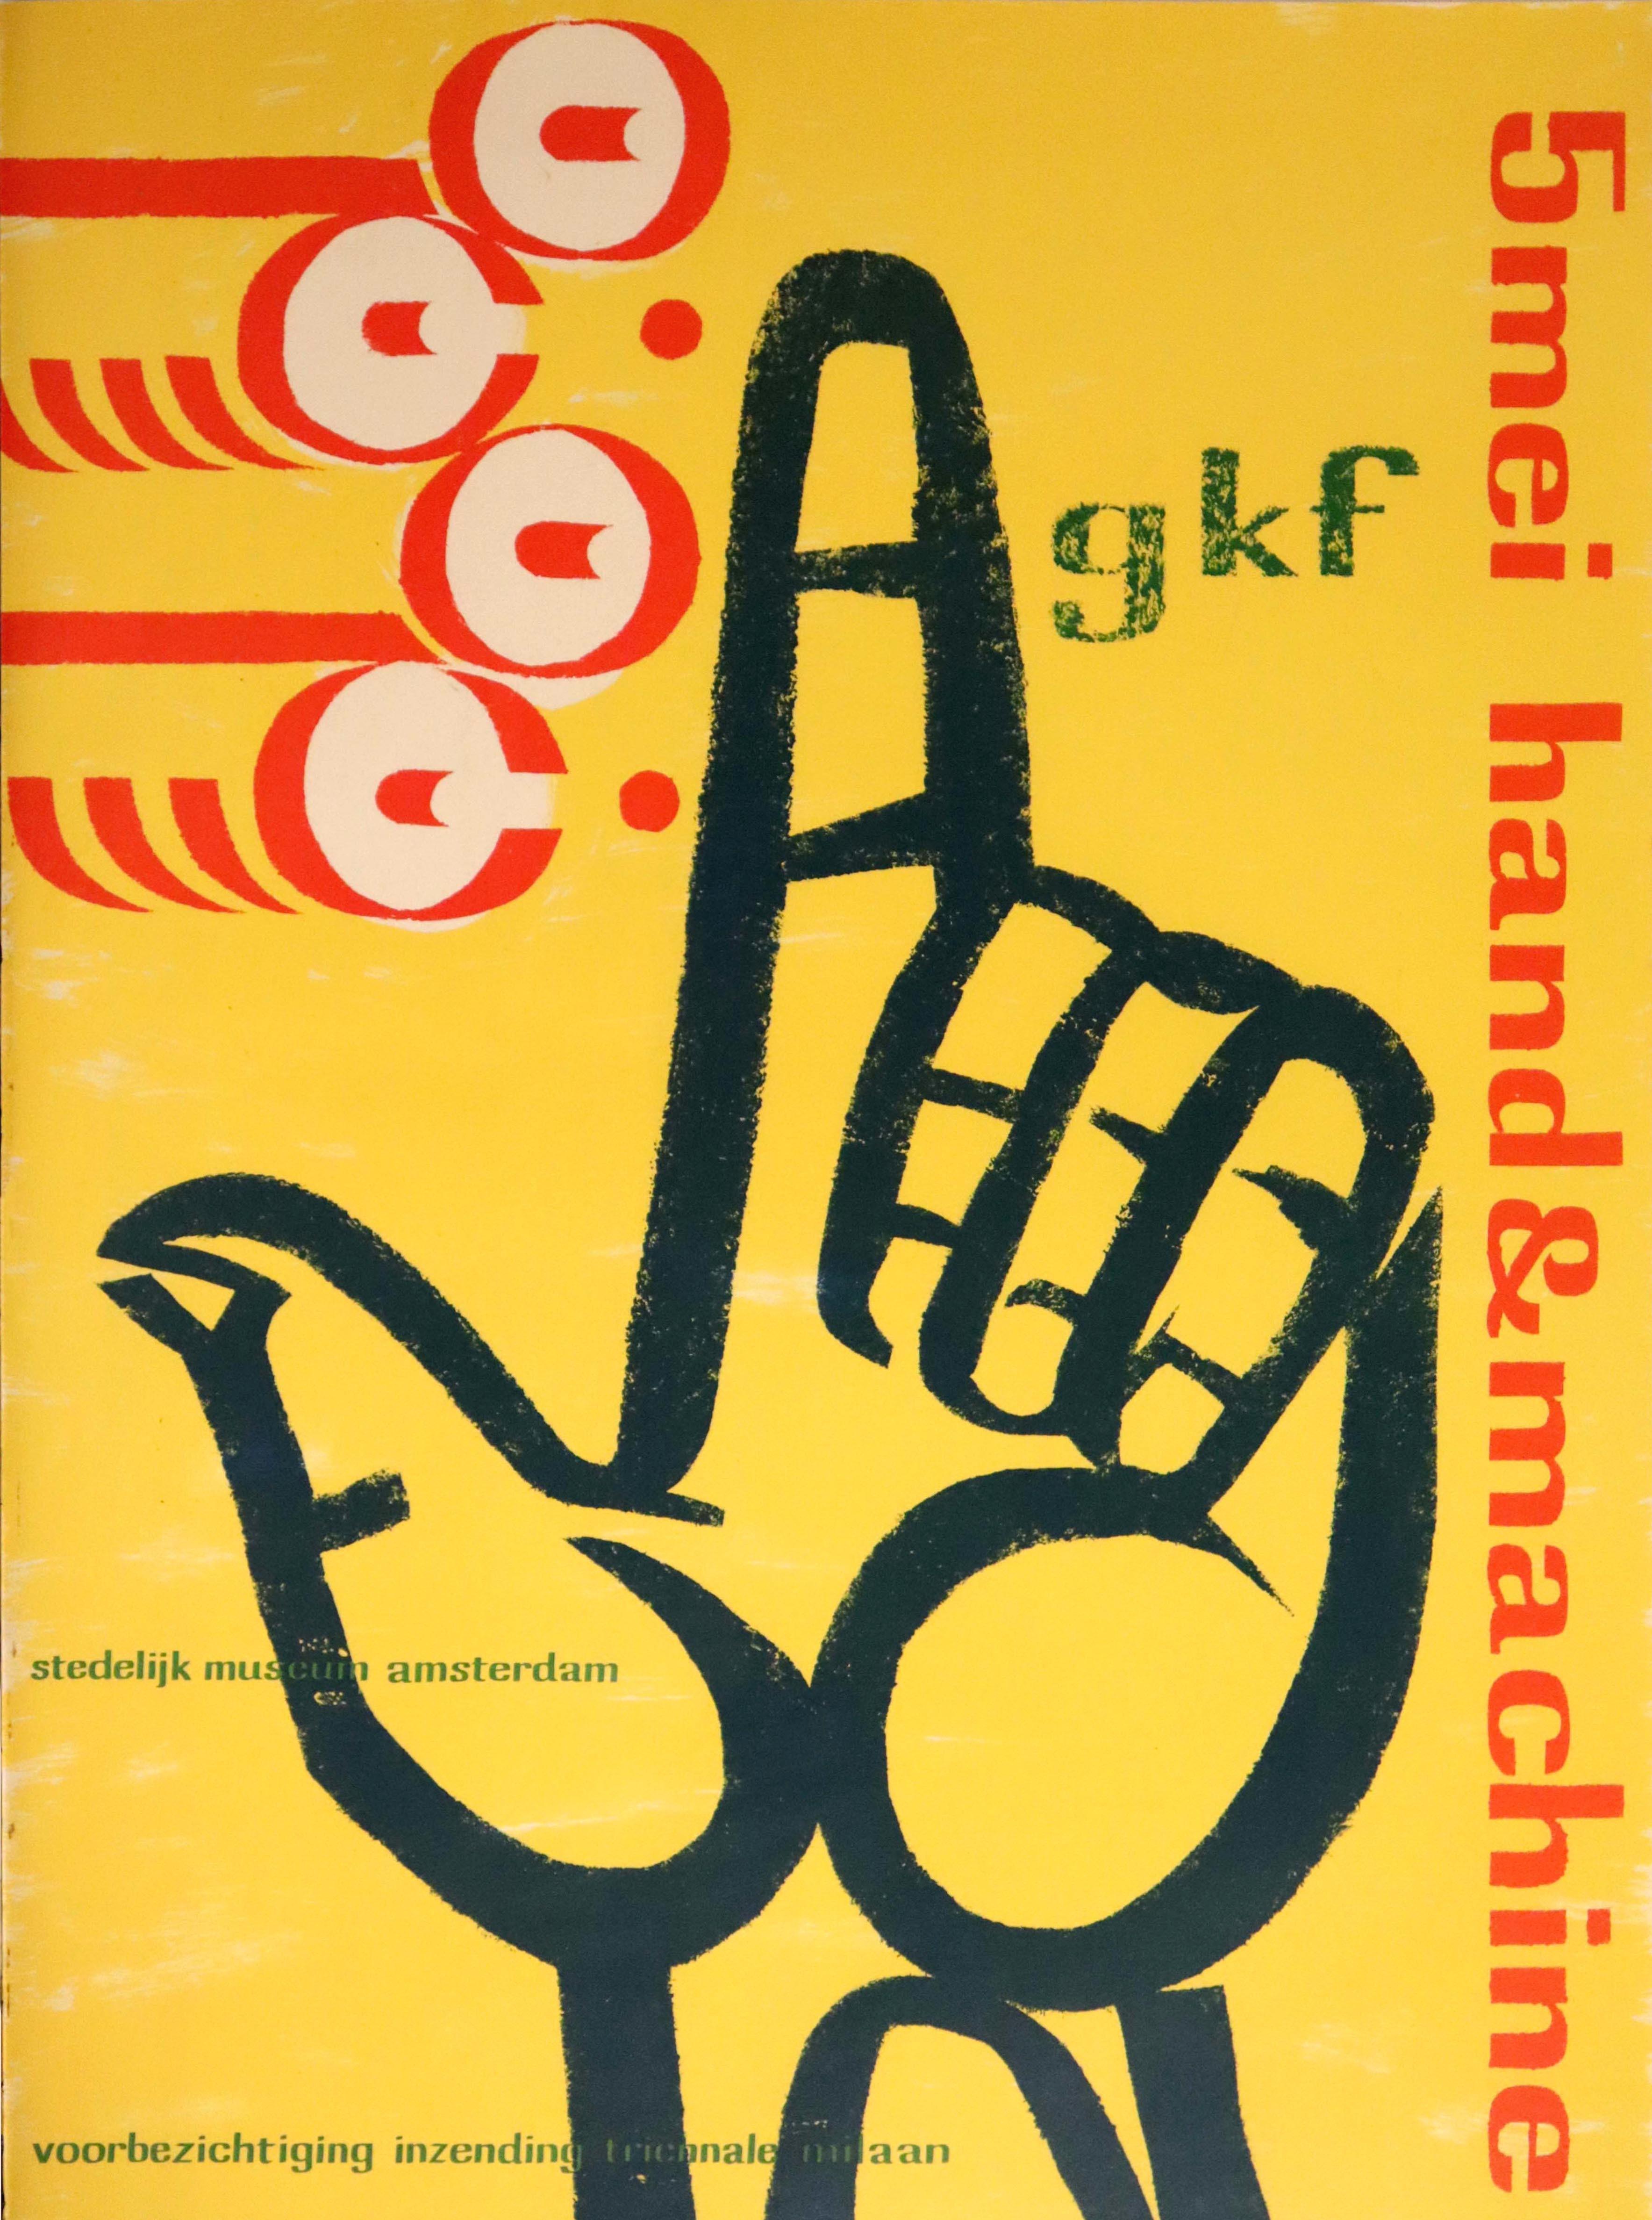 Dutch Original Vintage Poster For The GKF Exhibition Hand And Machine Stedelijk Museum For Sale